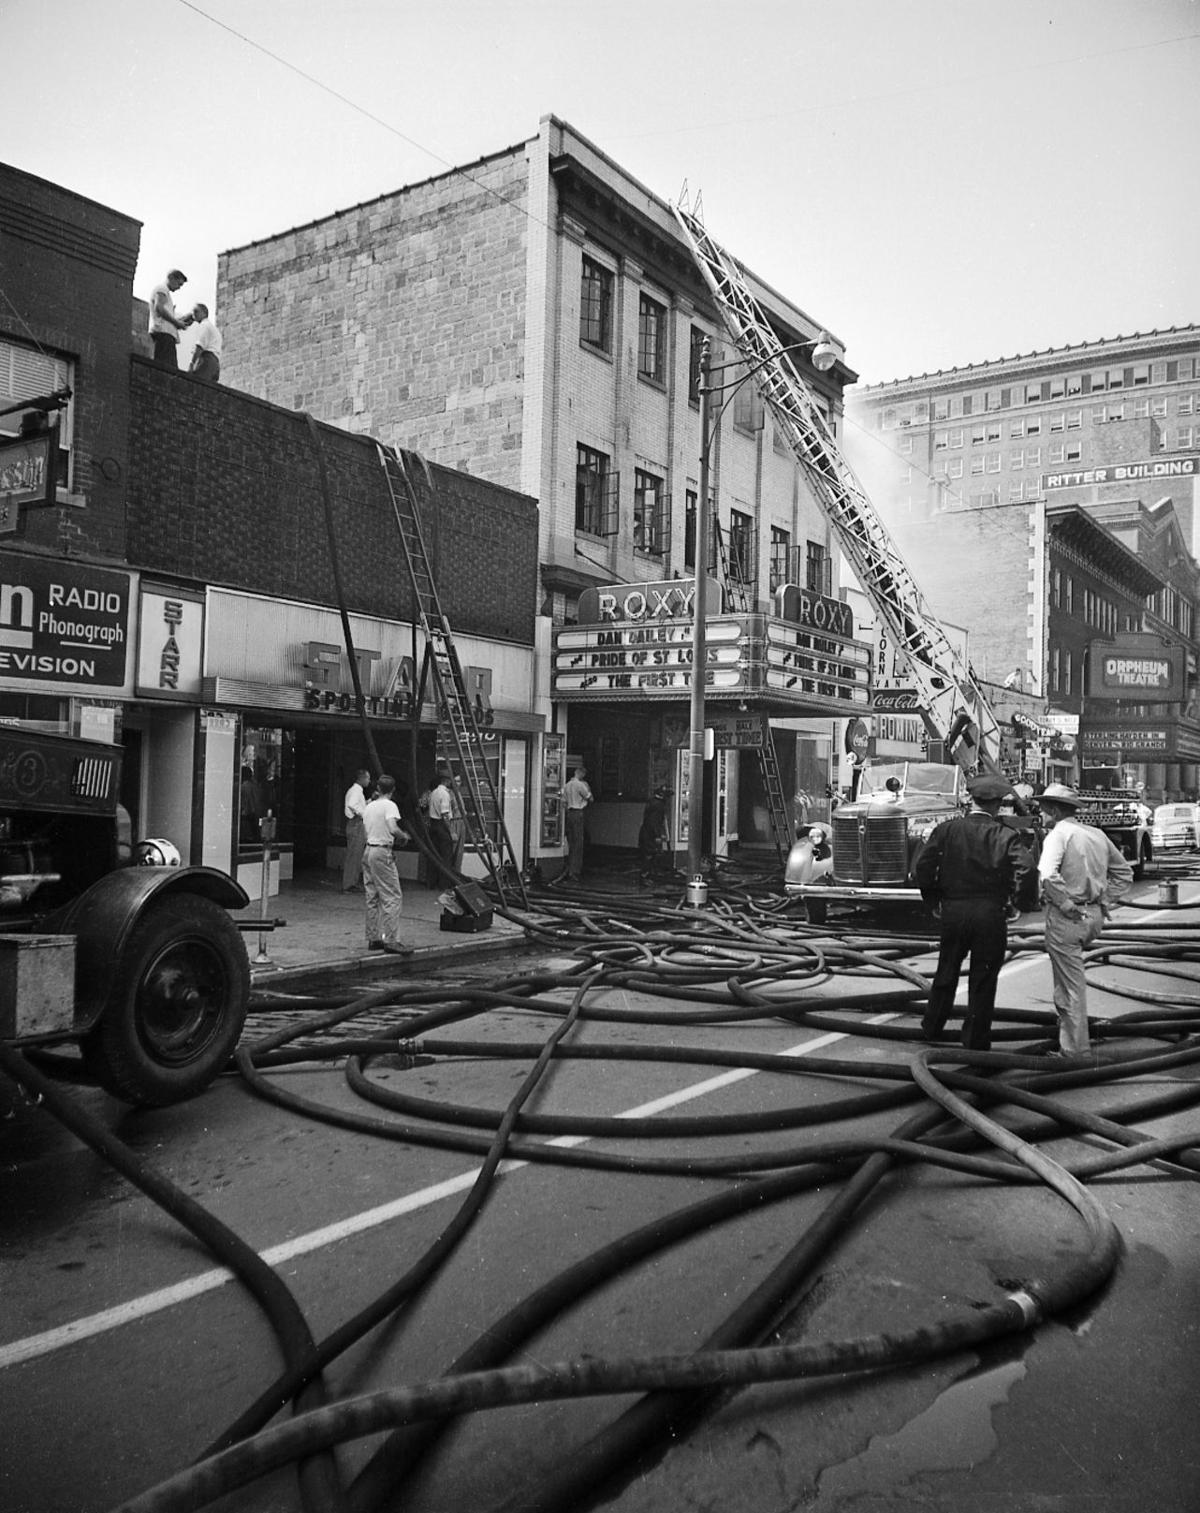 Firefighters respond to the fire at the Roxy on August 25, 1952